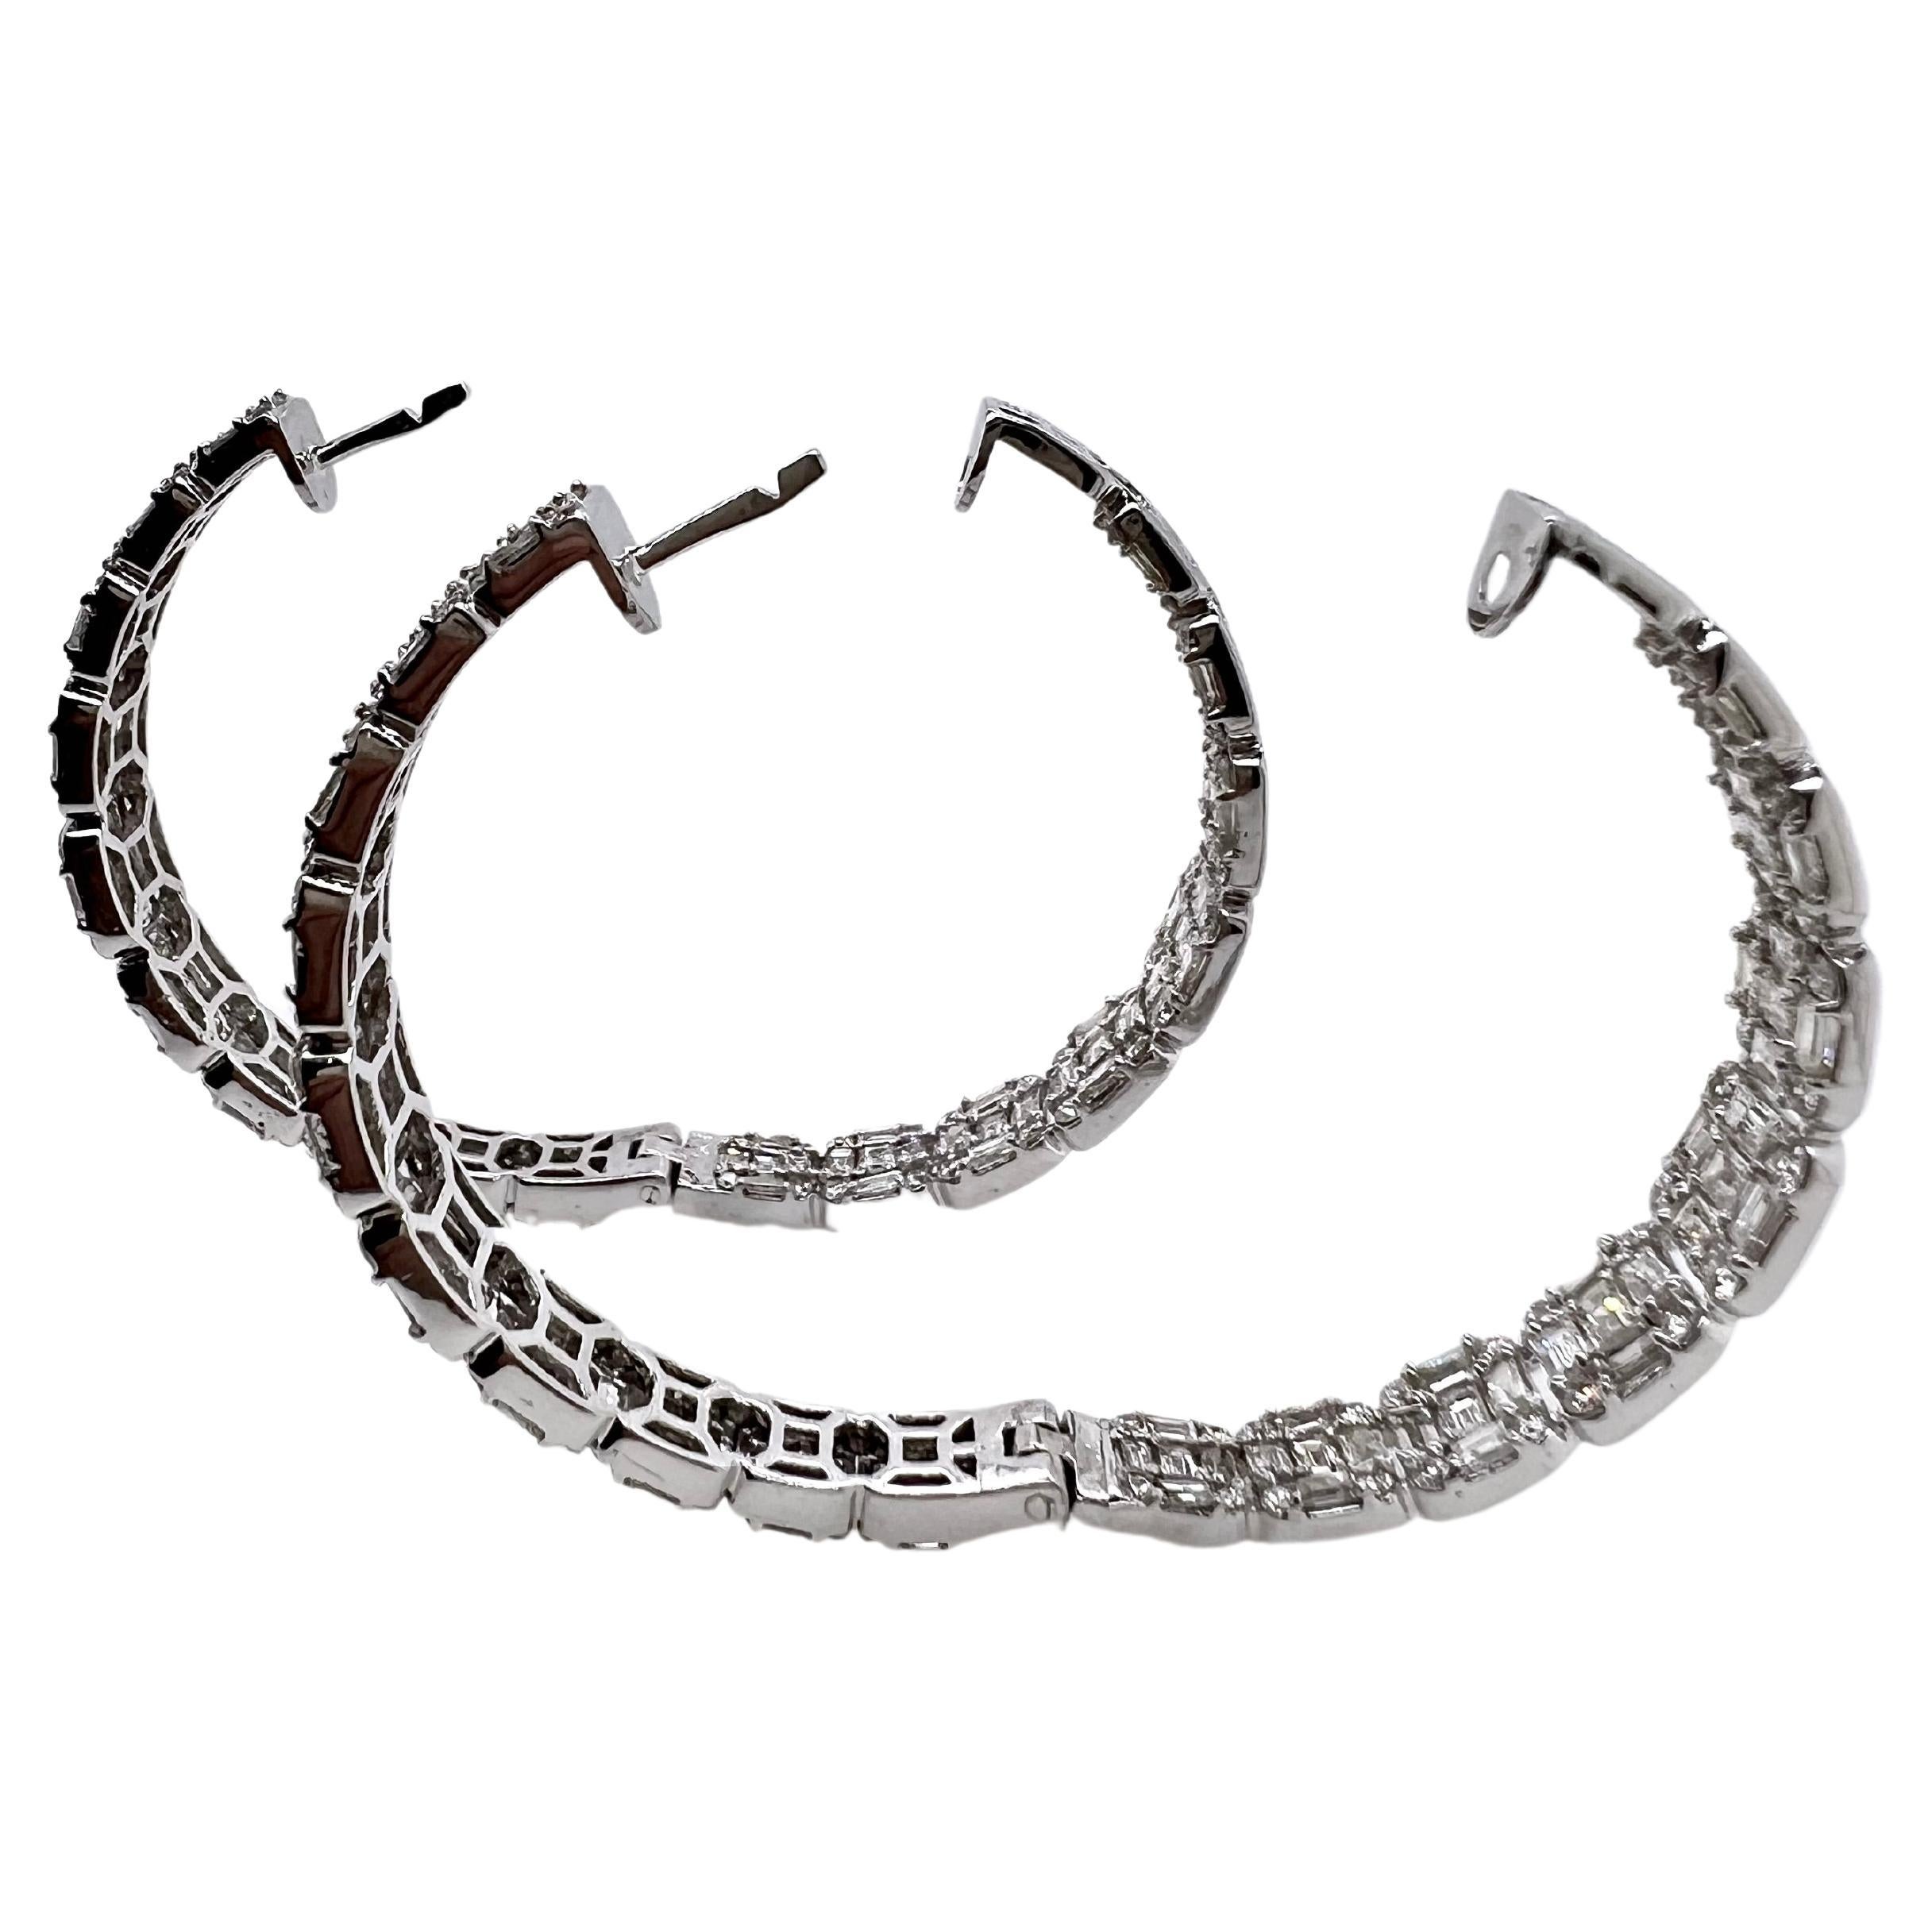 These absolutely stunning earrings have diamonds on the outer part of the hoop as well as the inside part.  The baguettes and round brilliant diamonds are arranged to make a beautiful pattern that will glisten and be seen by everyone. Ideal for